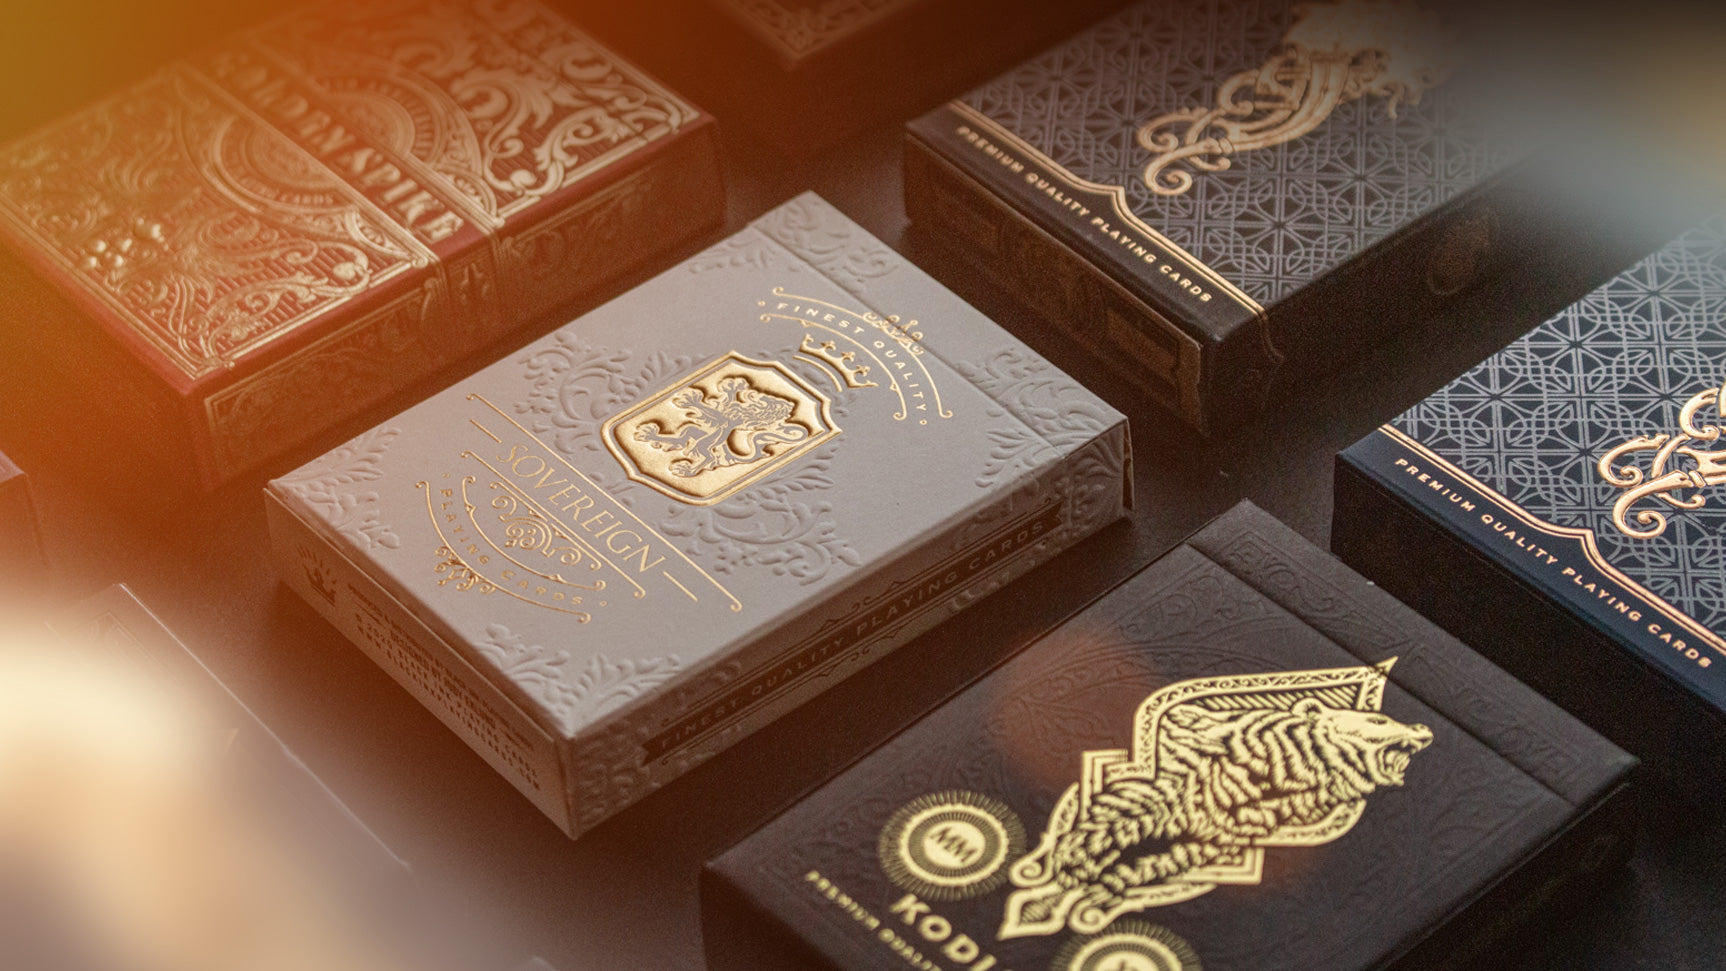 Luxury Playing Cards